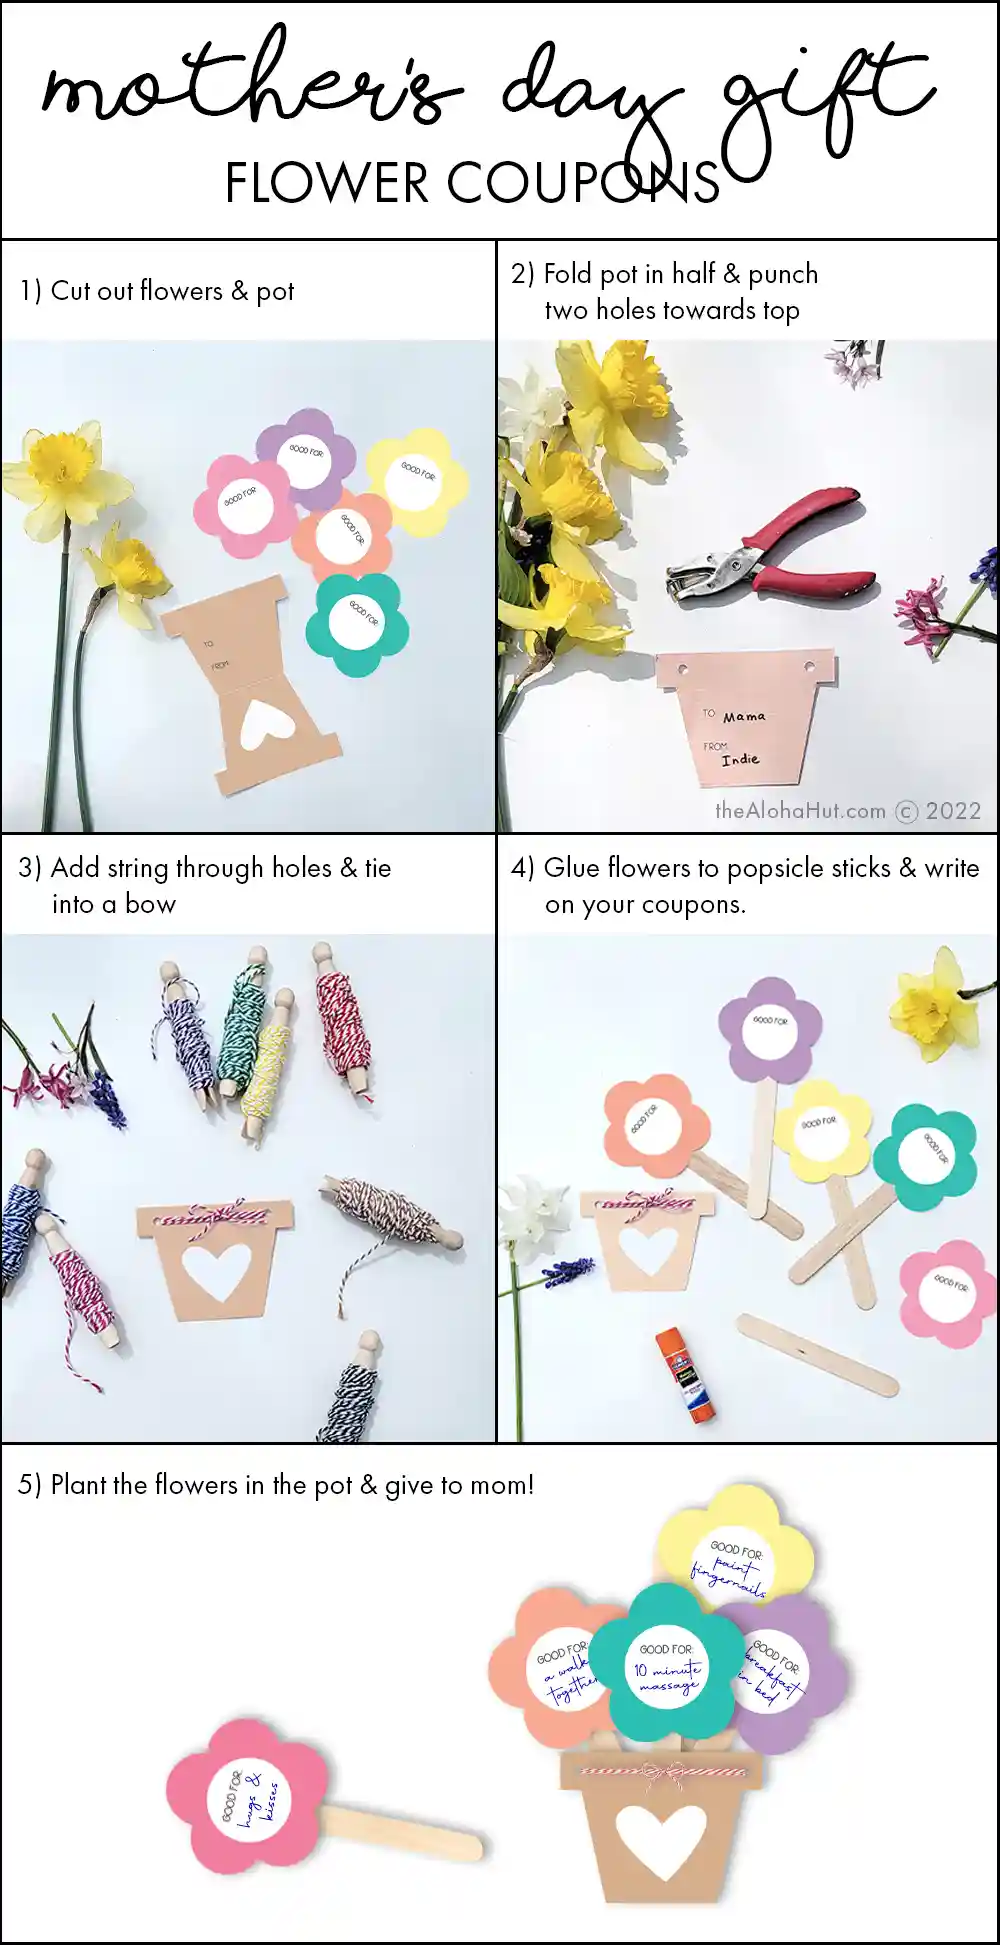 Easy Mother's Day gift idea for mom and/or grandma. Download the printable flowers and turn them into a coupon booklet for mom or grandma! Personalize your bouquet of flowers with acts of service and fun things you can do with mom or grandma.